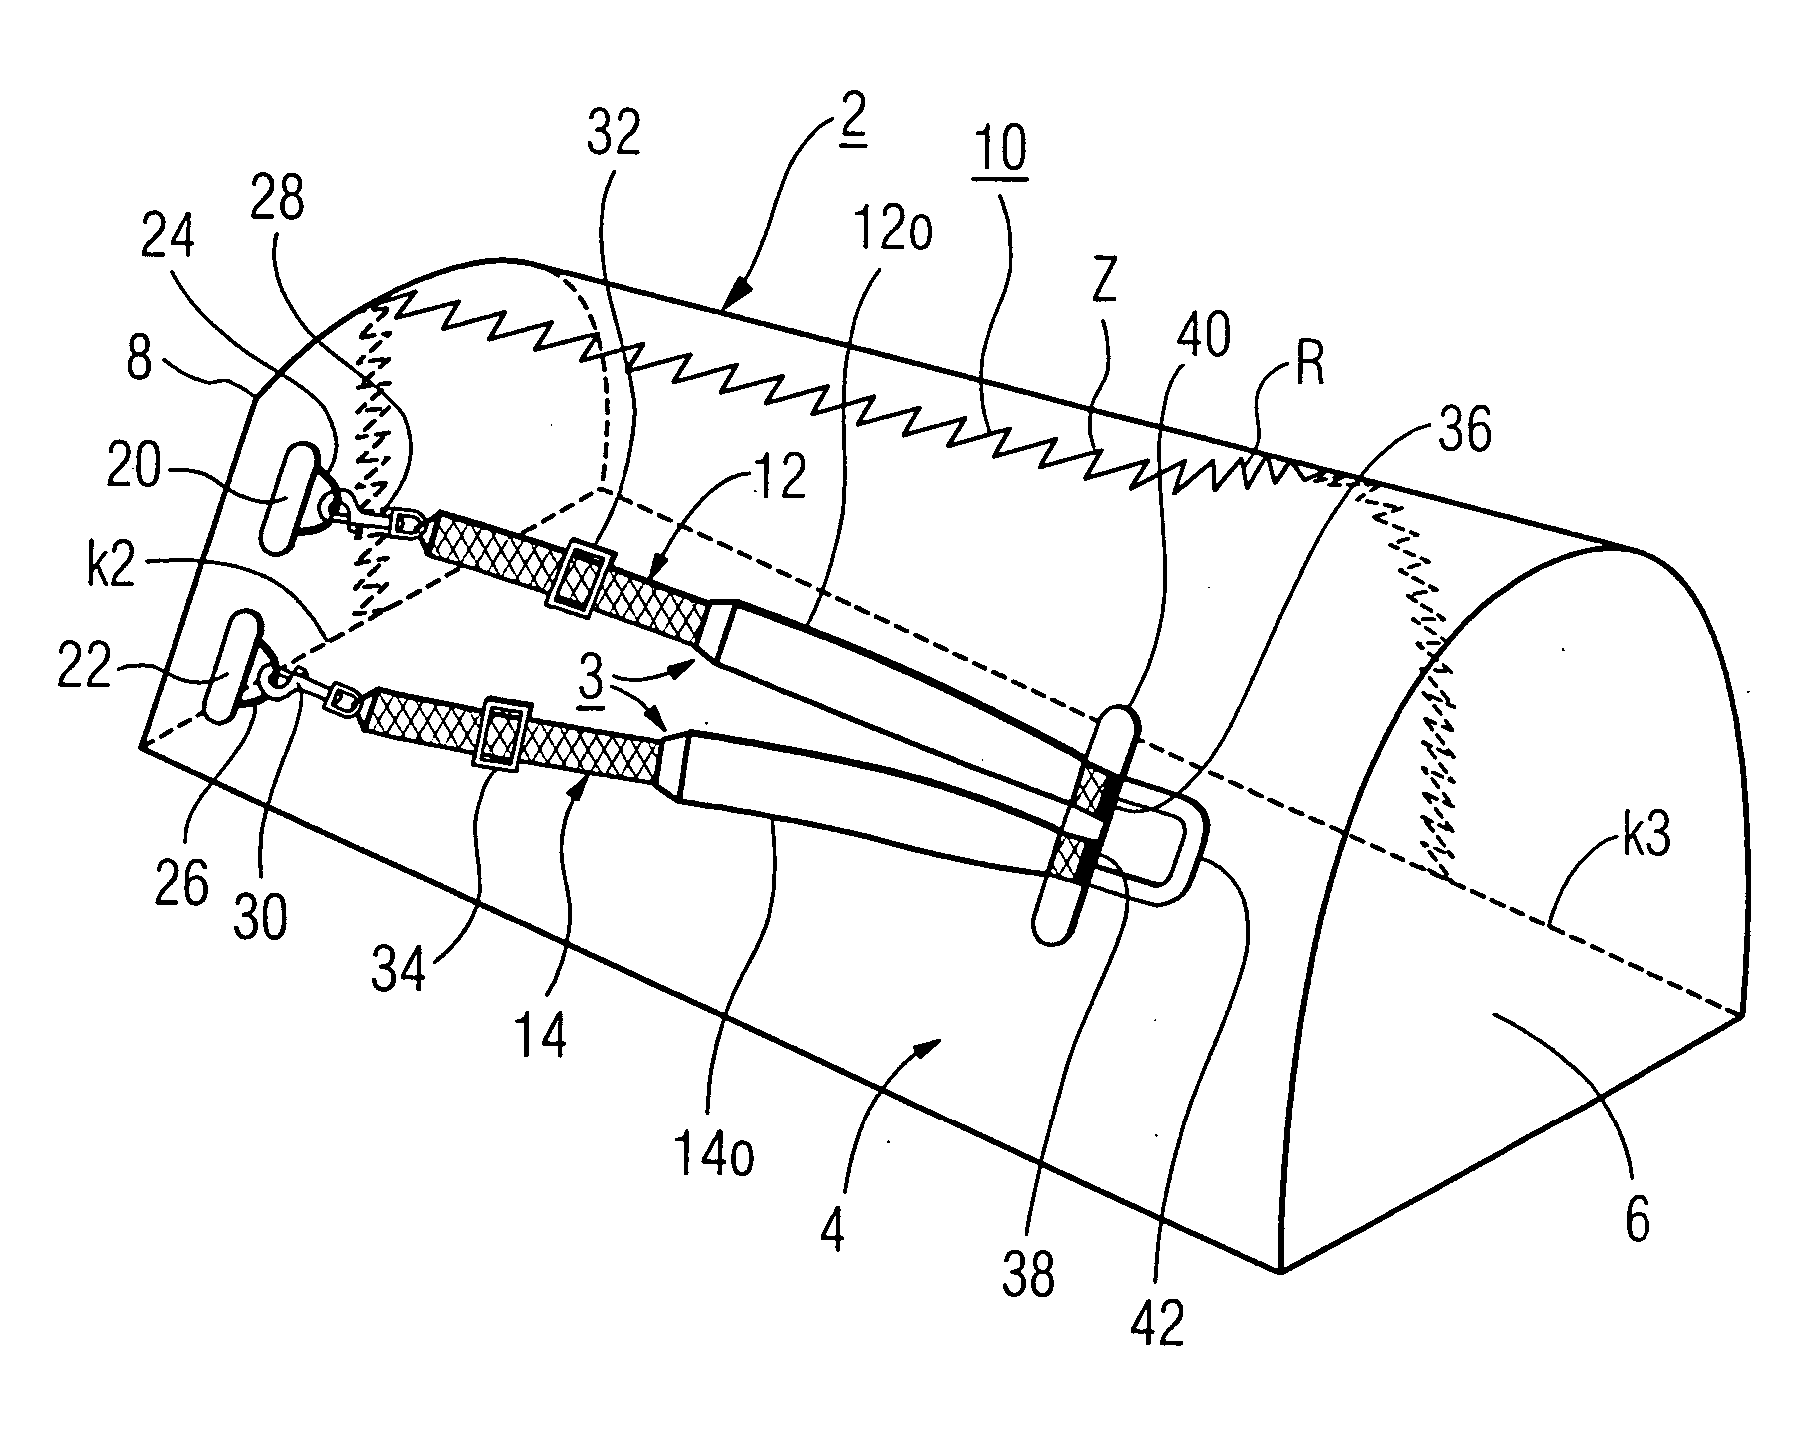 Support strap for a musical instrument or a musical instrument case